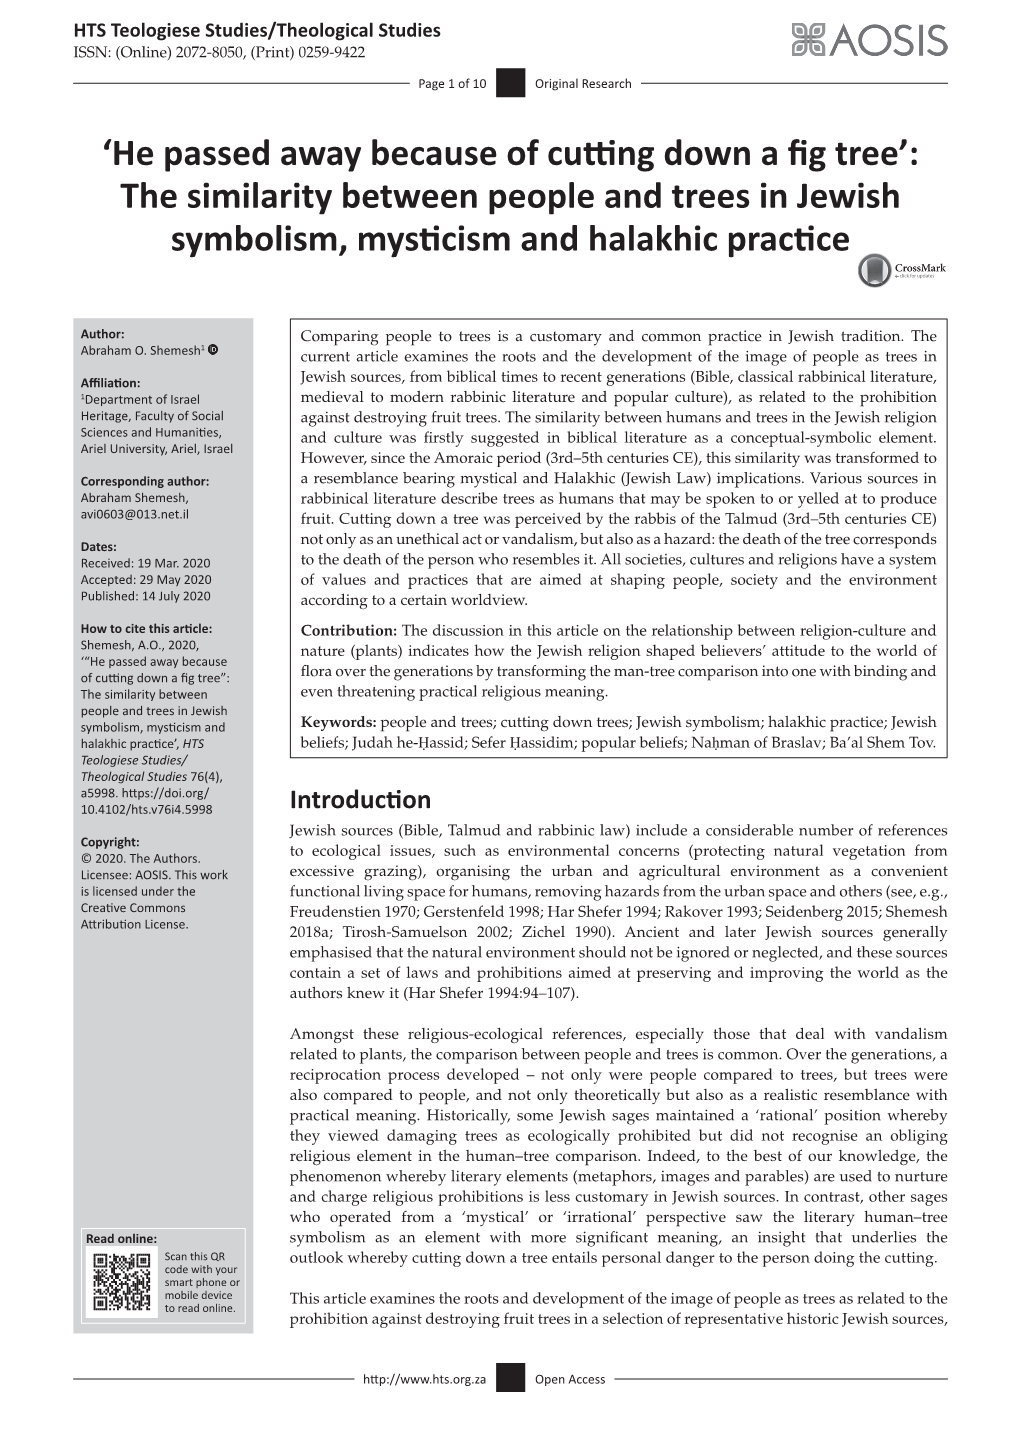 The Similarity Between People and Trees in Jewish Symbolism, Mysticism and Halakhic Practice